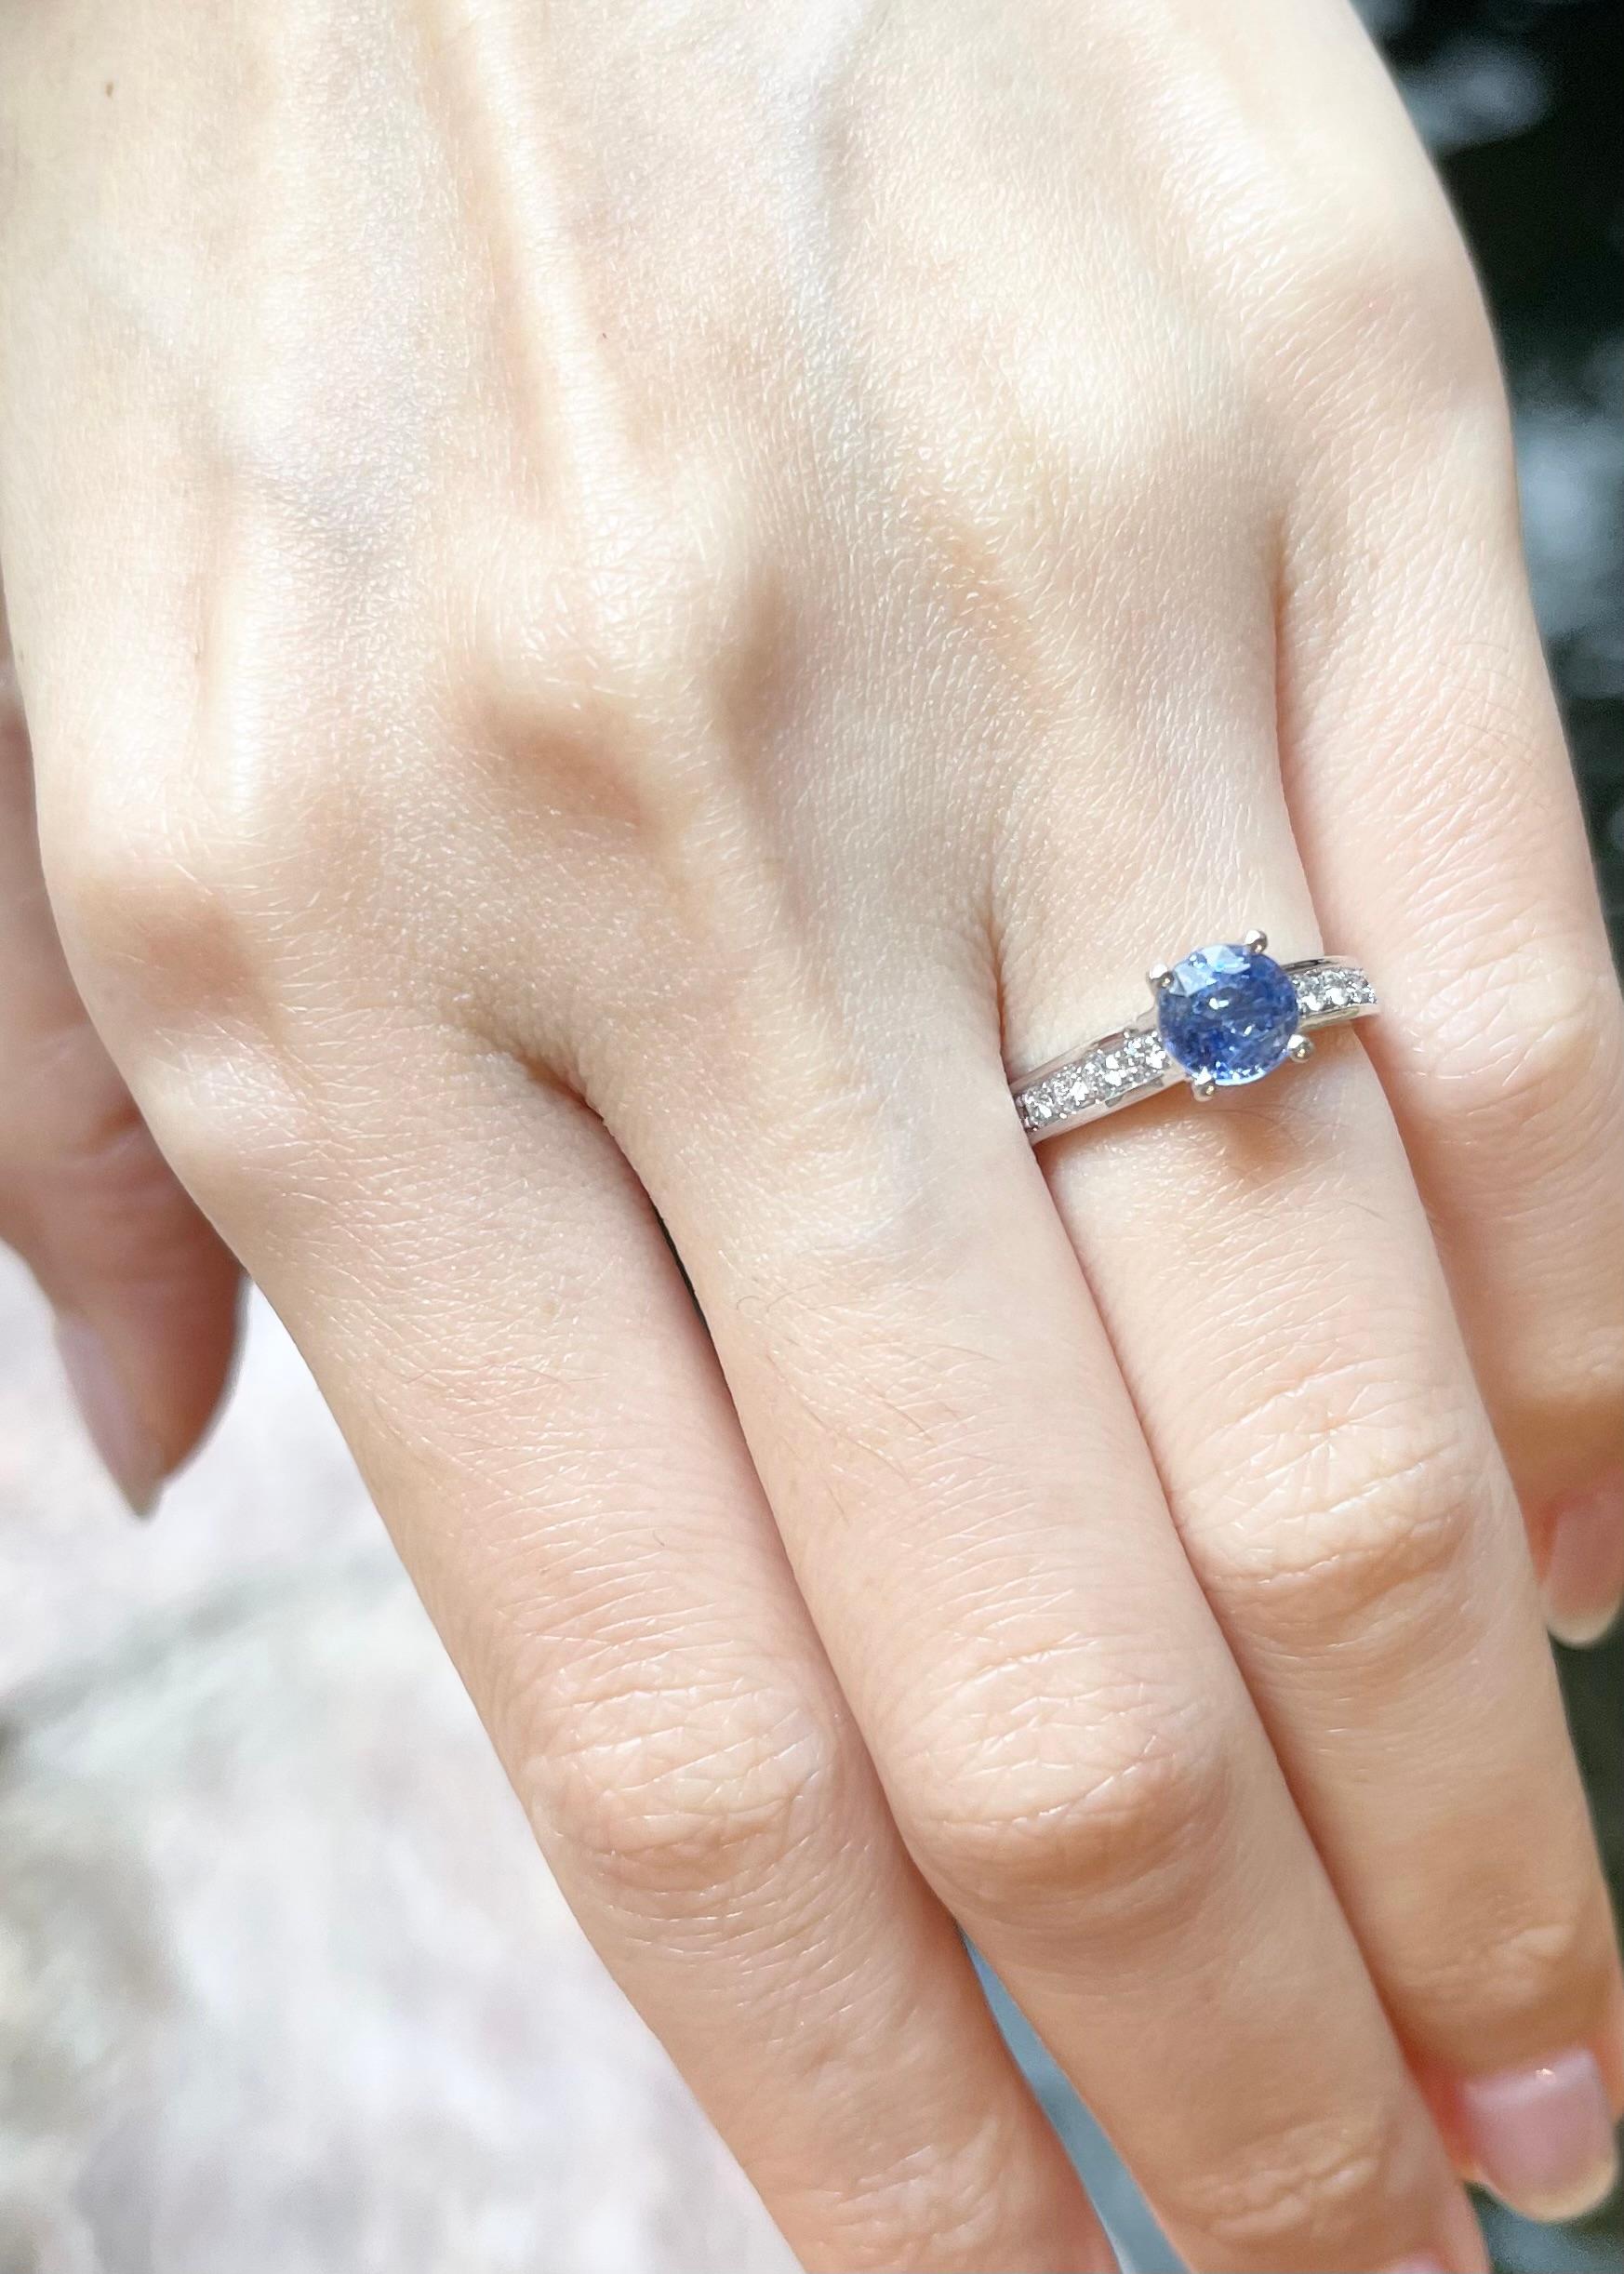 Blue Sapphire 1.13 carats with Diamond 0.17 carat Ring set in 18K White Gold Settings

Width:  0.6 cm 
Length: 0.6 cm
Ring Size: 48
Total Weight: 4.3 grams

